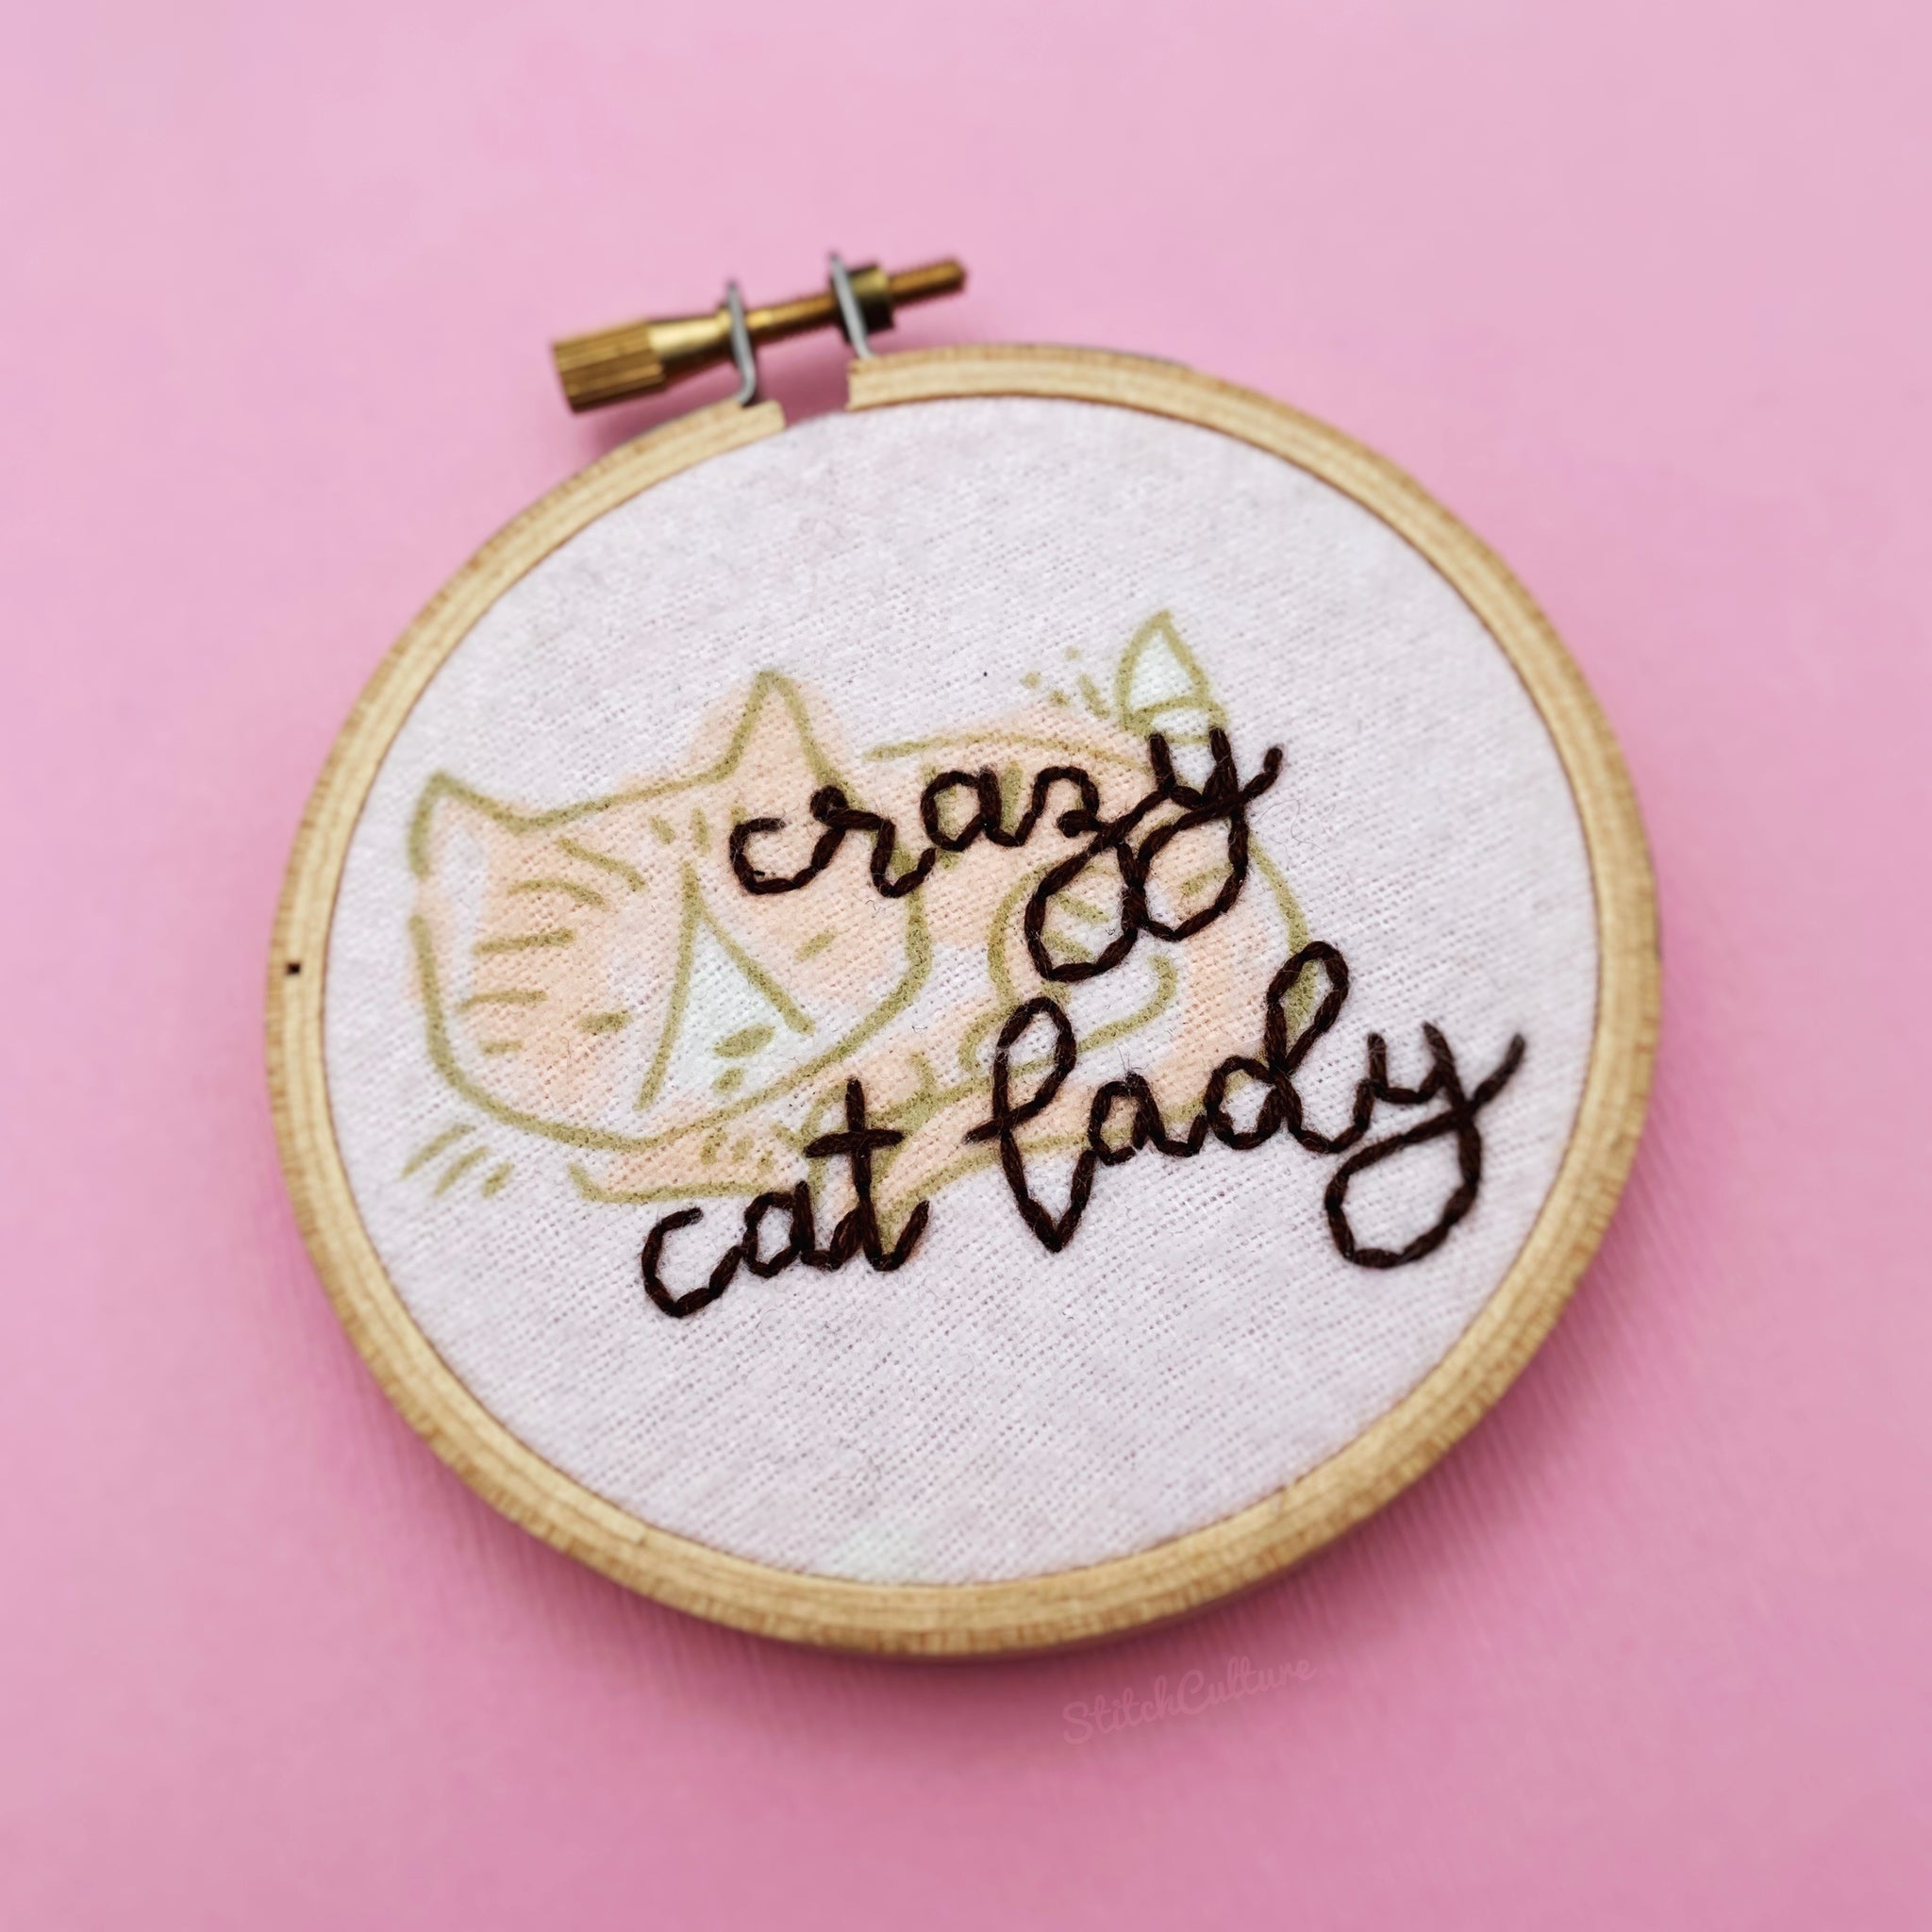 CRAZY CAT LADY / Cat Lovers Embroidery Hoop